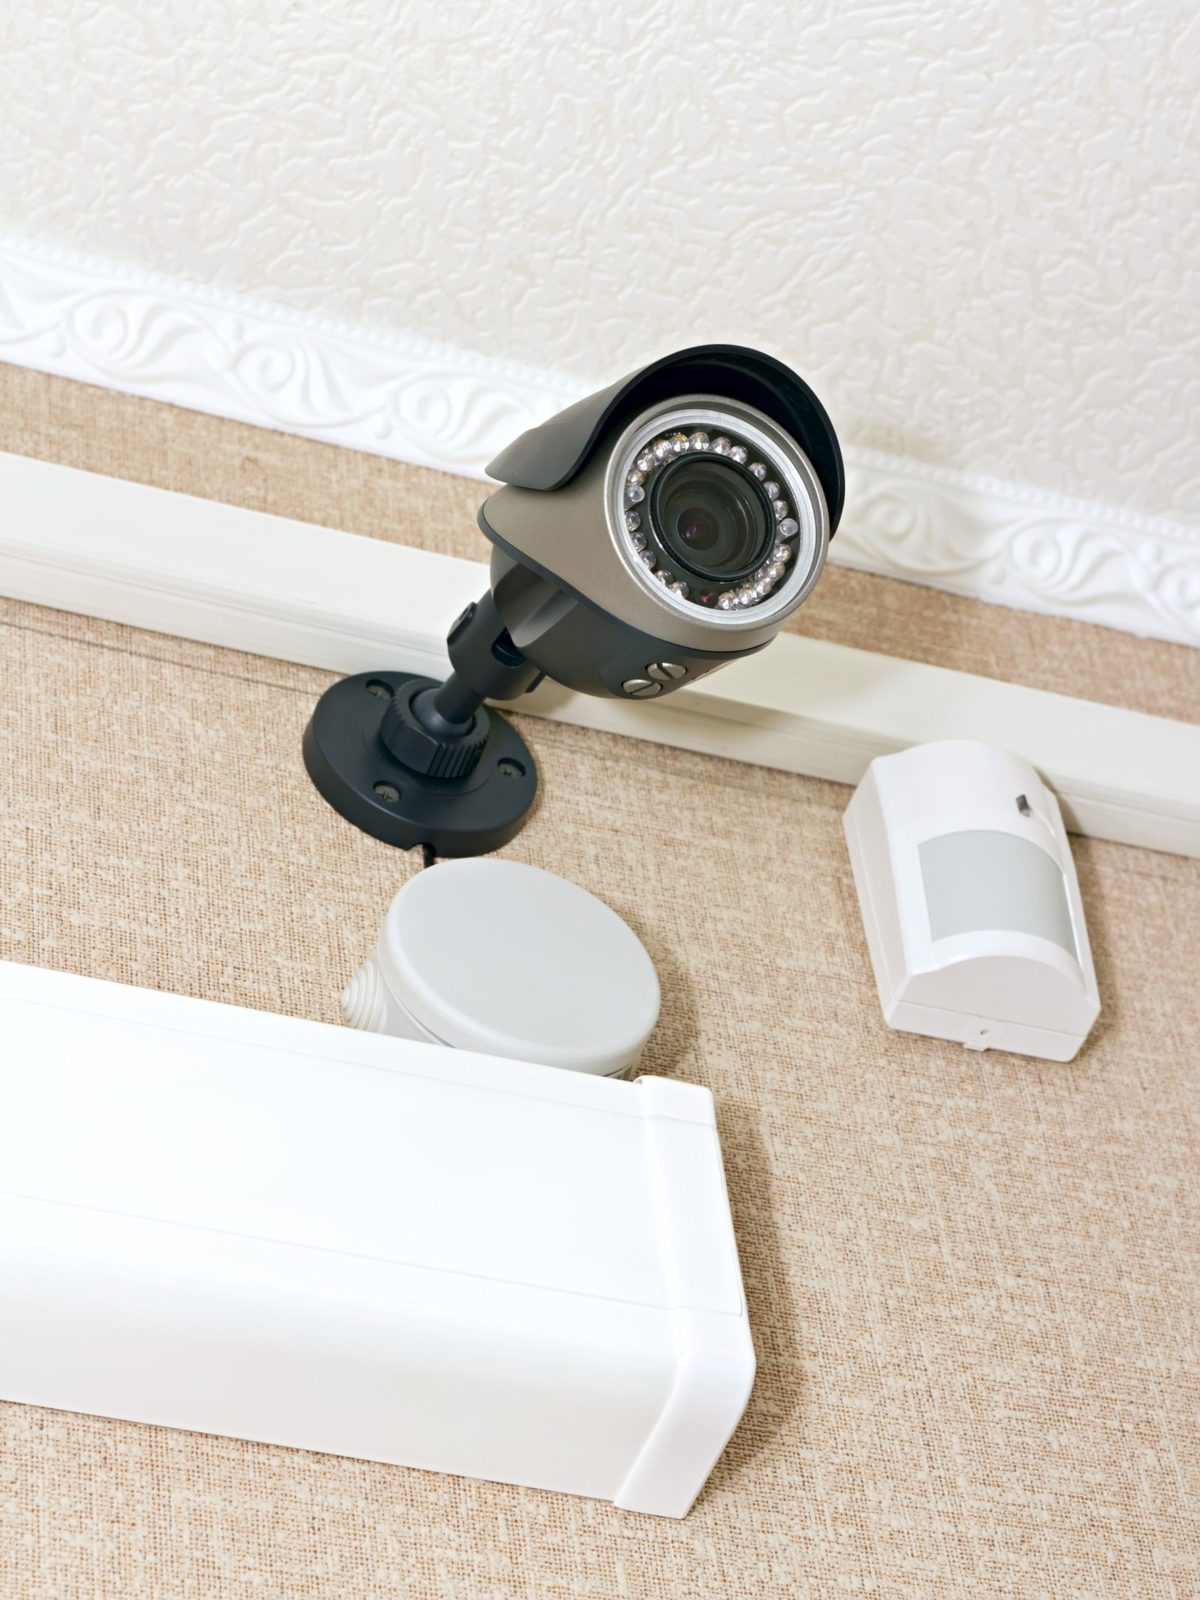 What Are the Different Types of CCTV Cameras?